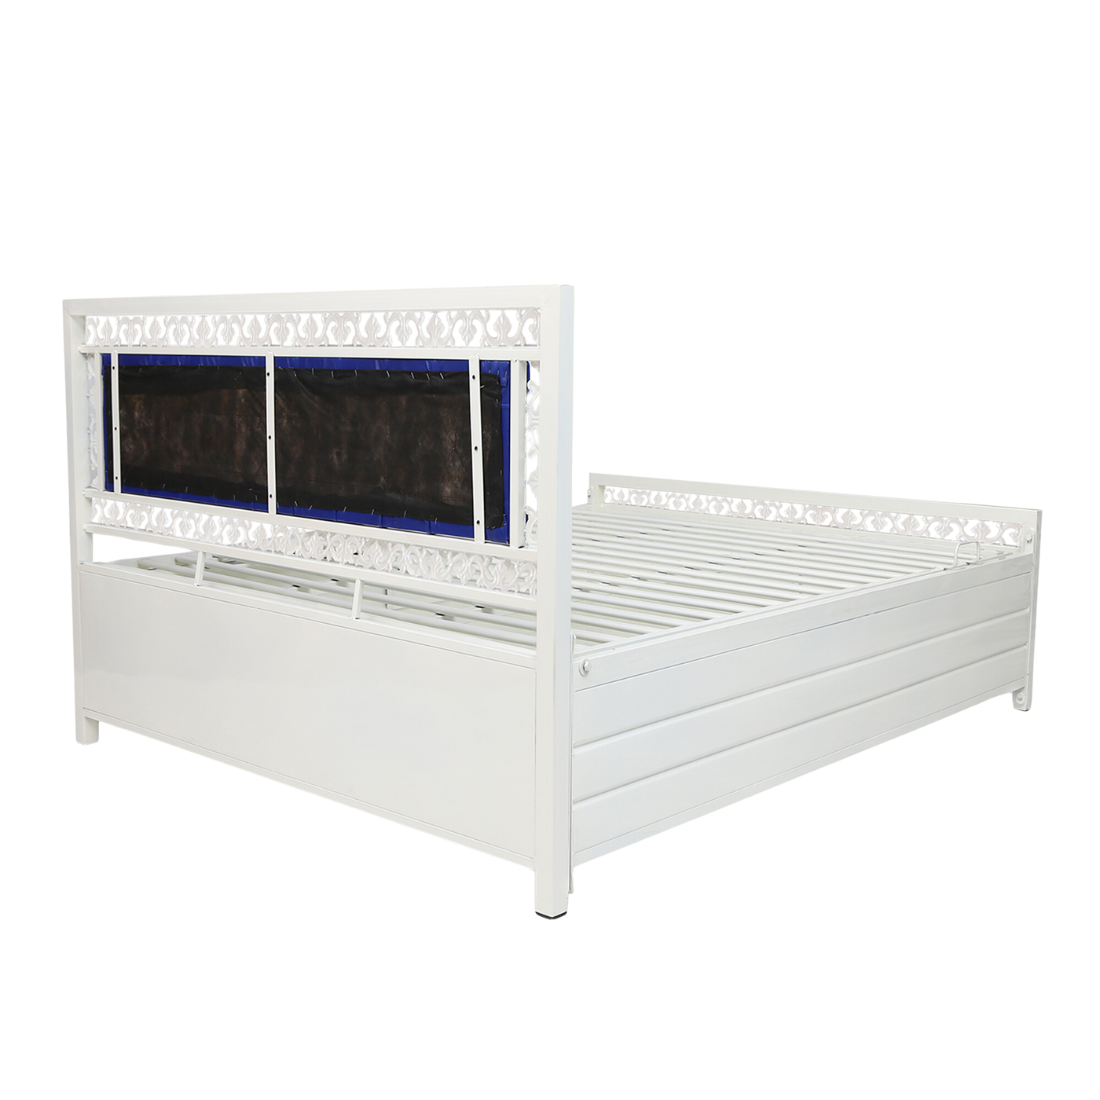 Cuba Hydraulic Storage Single Metal Bed with Blue Cushion Headrest (Color - White)